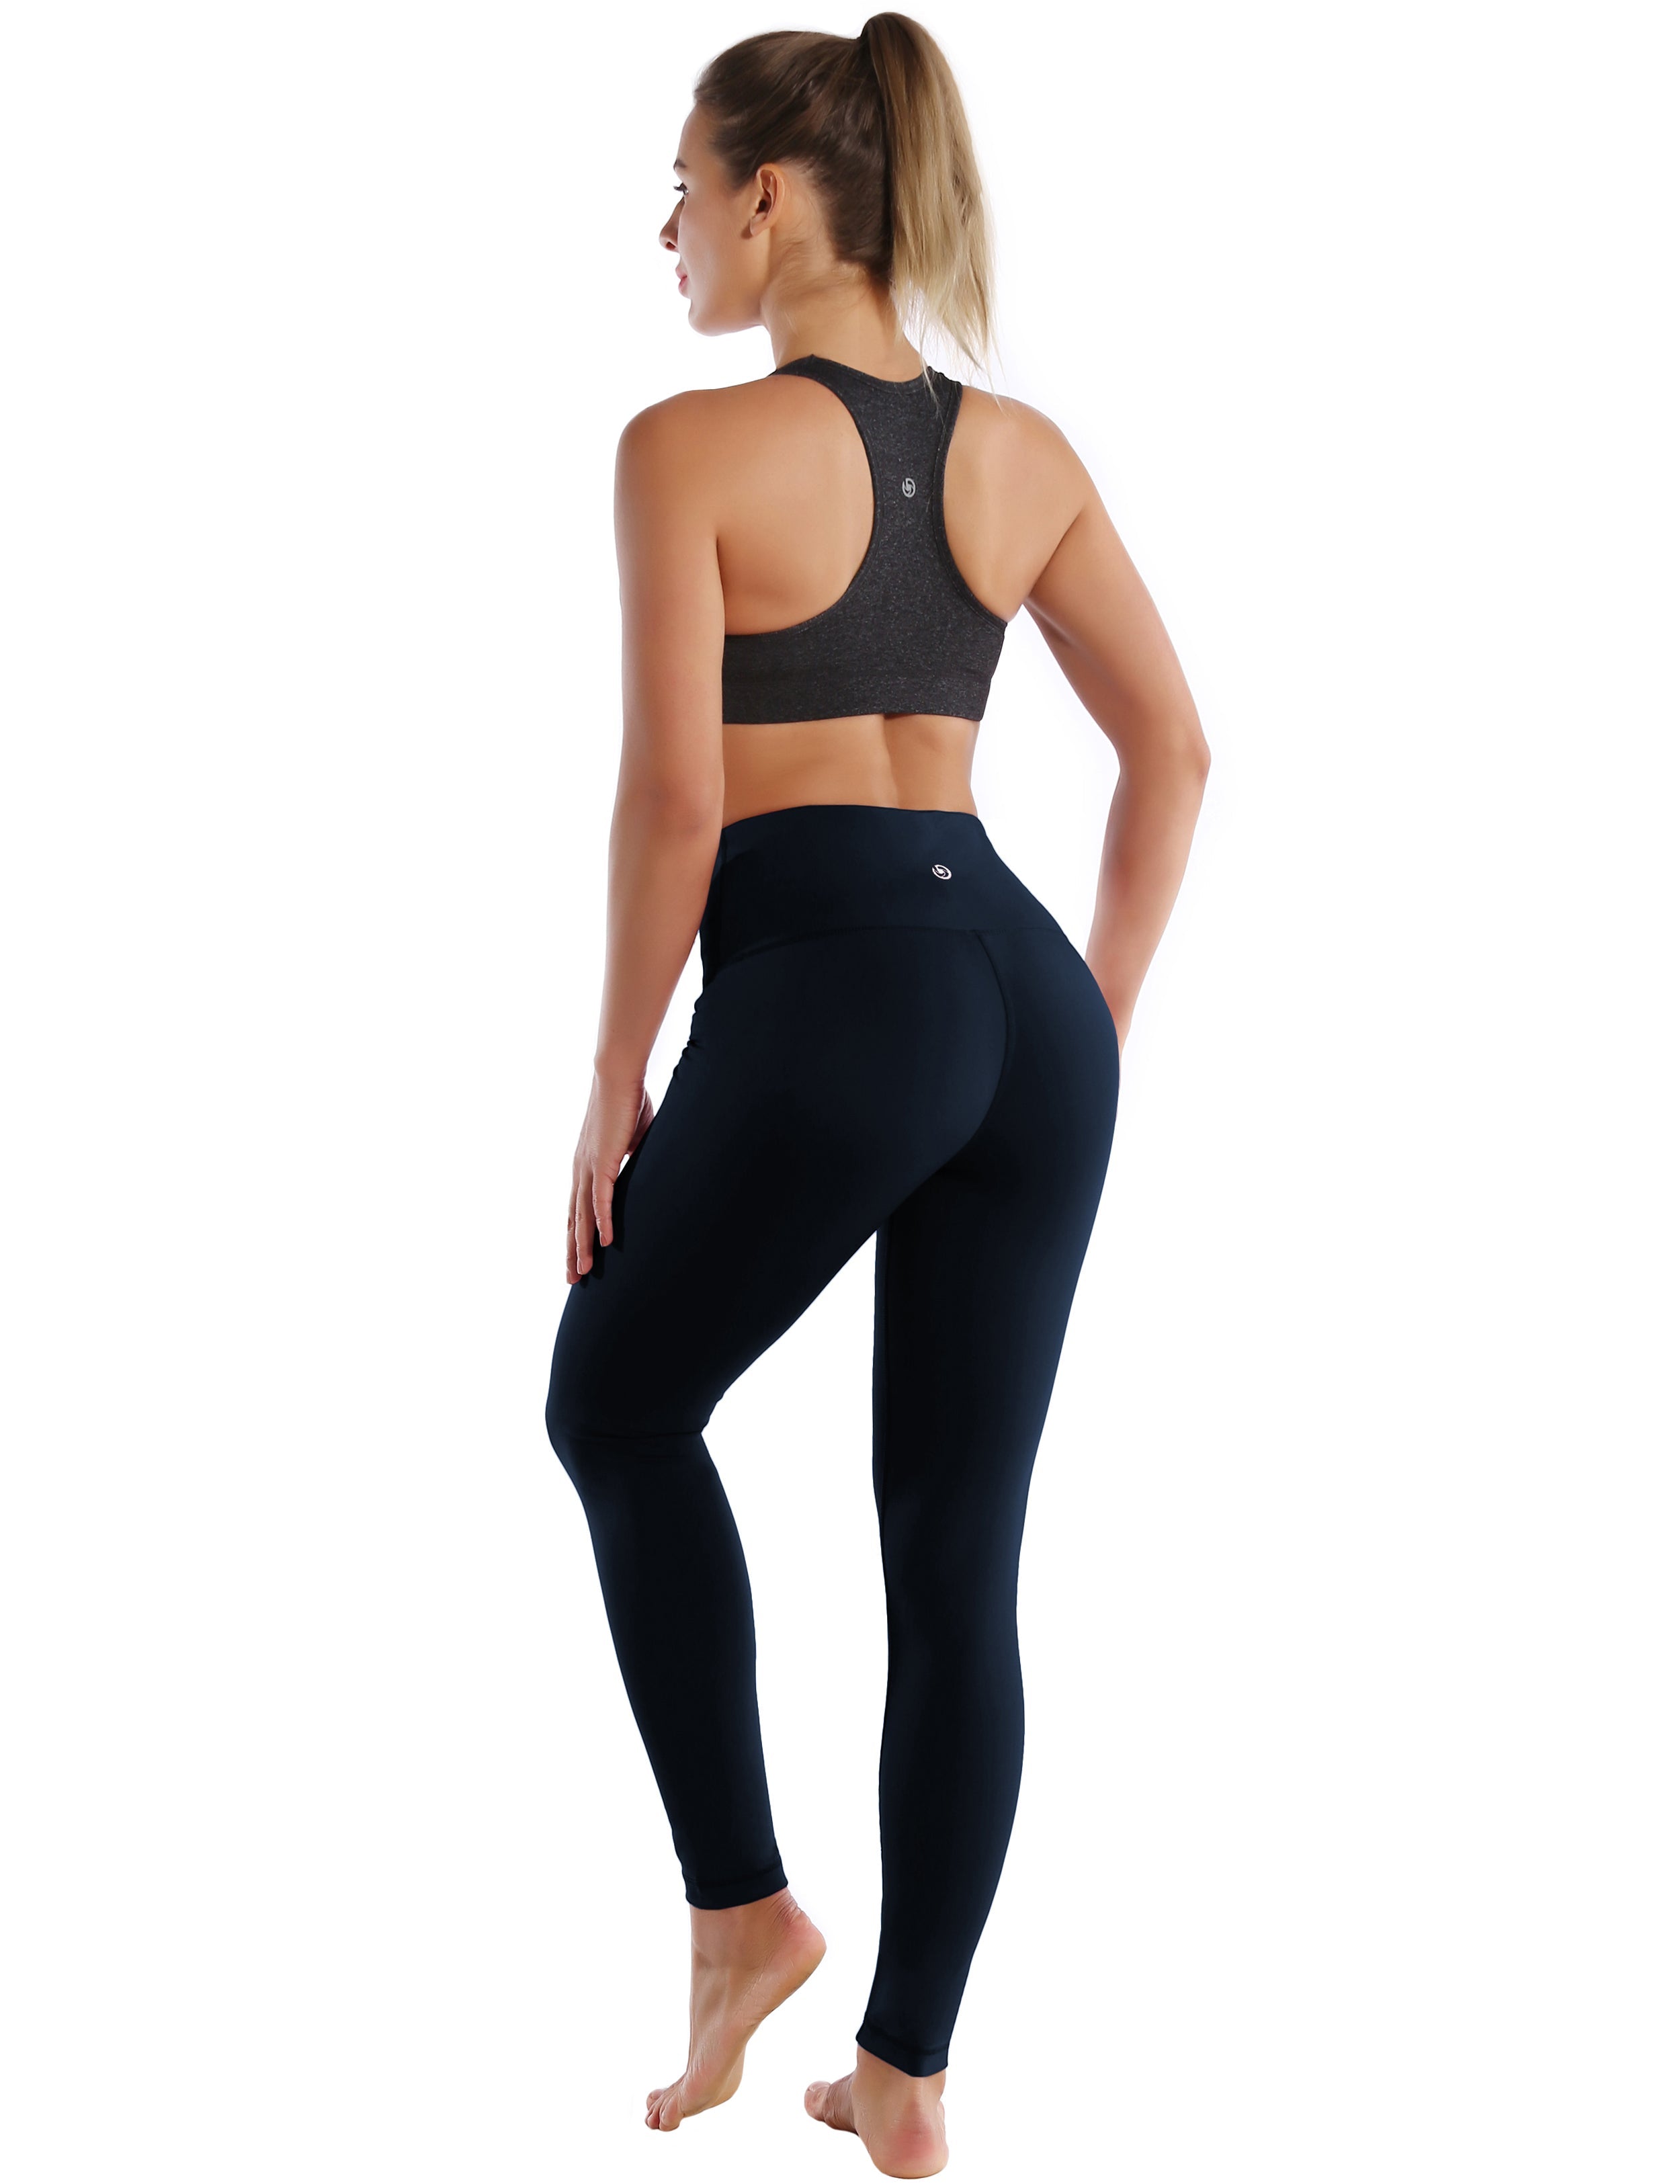 High Waist Running Pants darknavy 75%Nylon/25%Spandex Fabric doesn't attract lint easily 4-way stretch No see-through Moisture-wicking Tummy control Inner pocket Four lengths